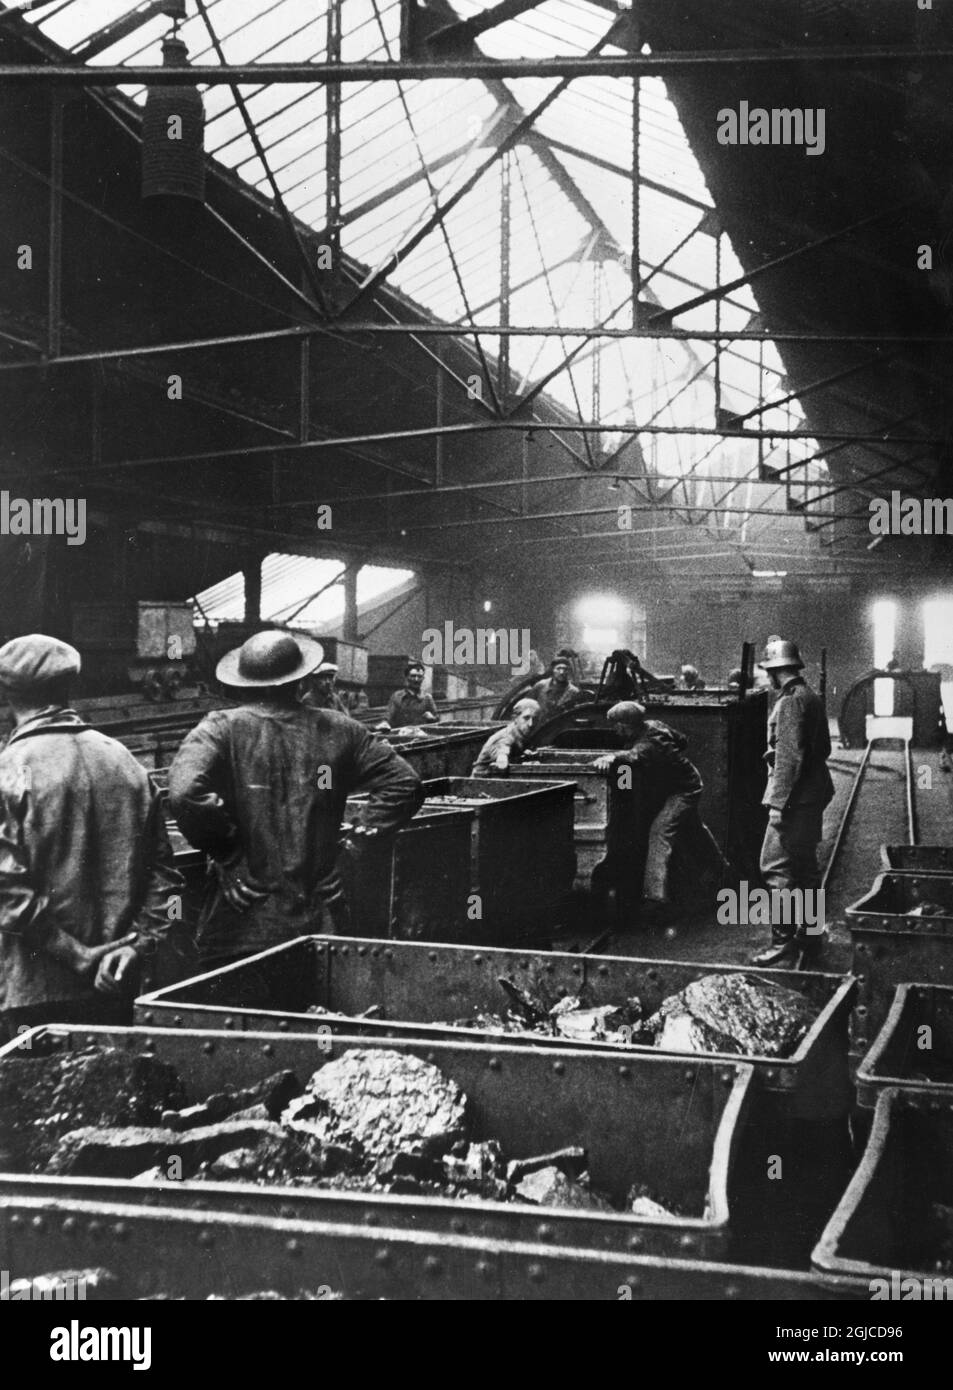 LENZ, FRANCE 1940-44 Frenchmen work in the Lievin pit in Lenz, France under supervision of German soldiers, during the German occupation of parts of France during the Second World War. Photo: AB Text & Bilder / SVT / Kod: 5600 Stock Photo